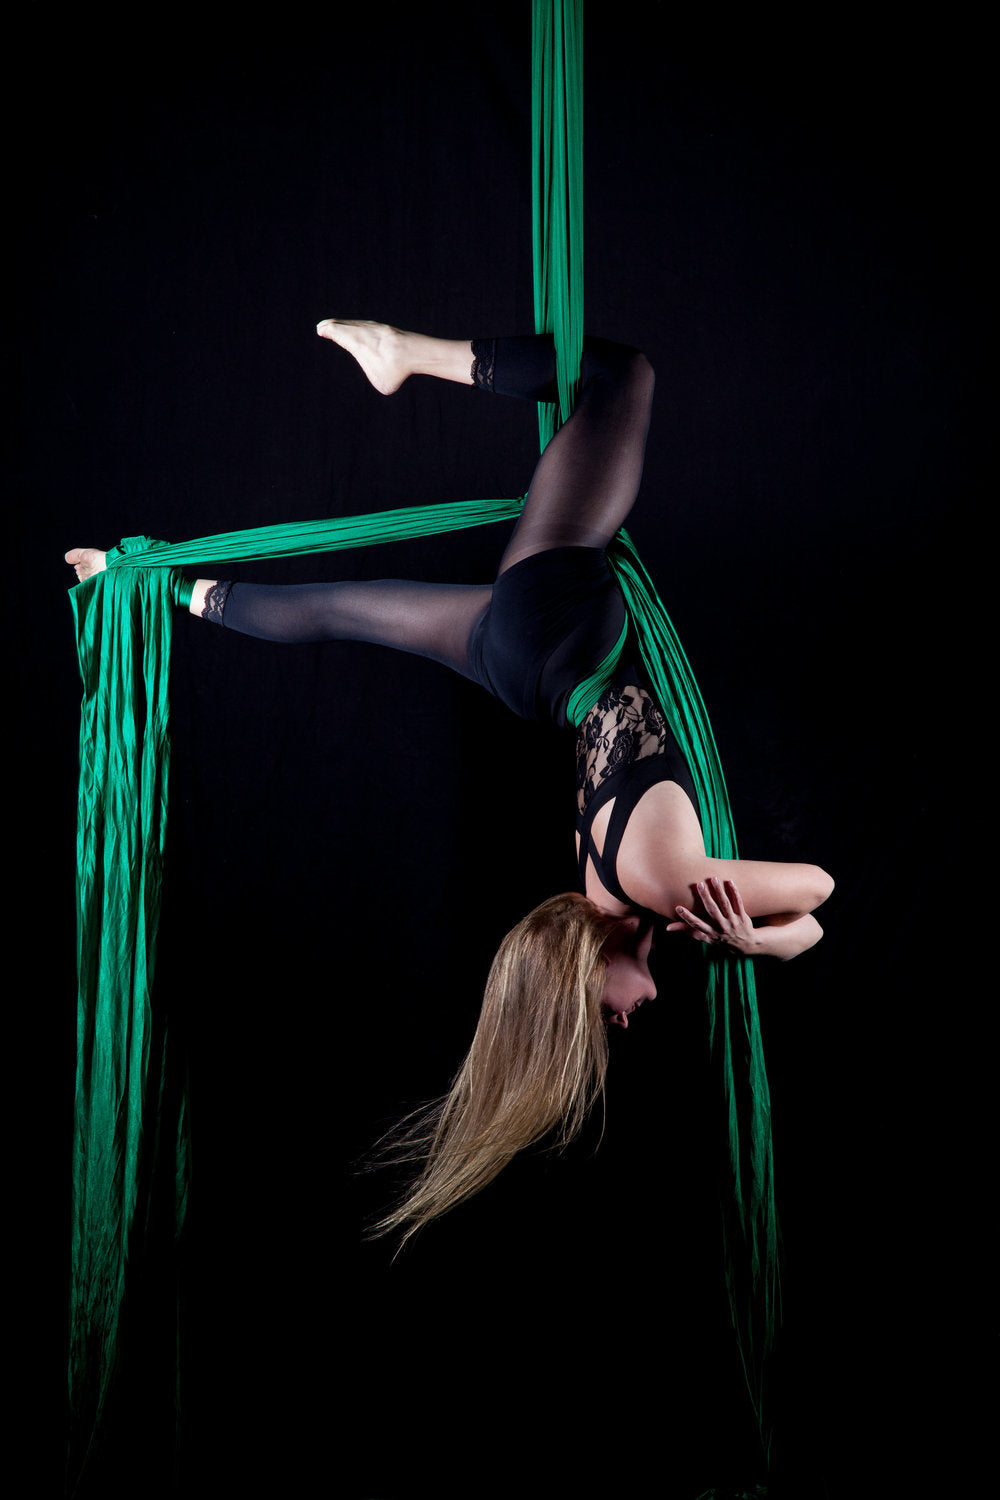 Health benefits of aerial arts – The Spinsterz